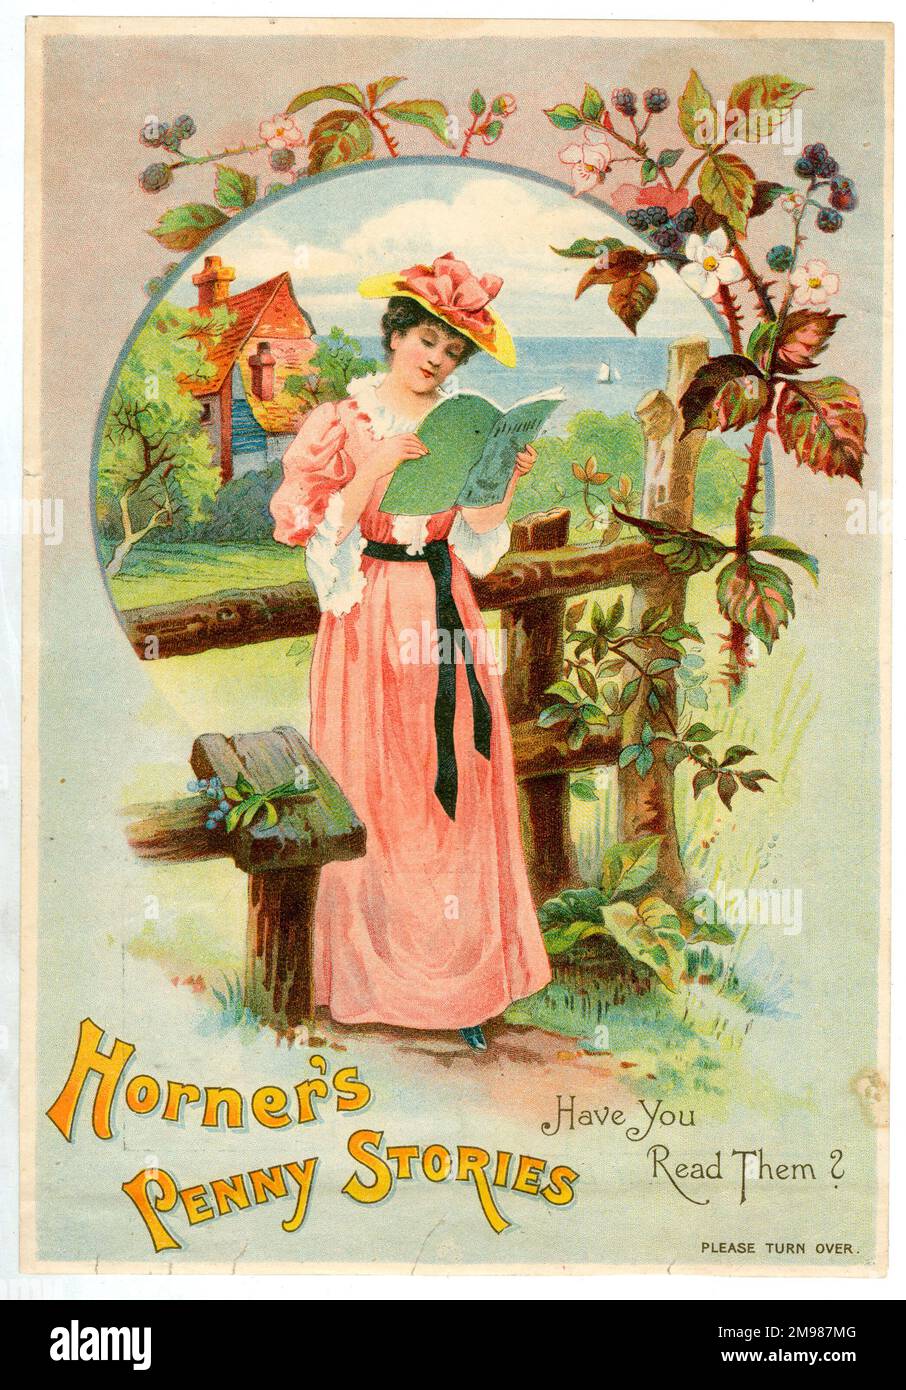 Advertisement for Horner's Penny Stories  -- Have You Read Them? Stock Photo